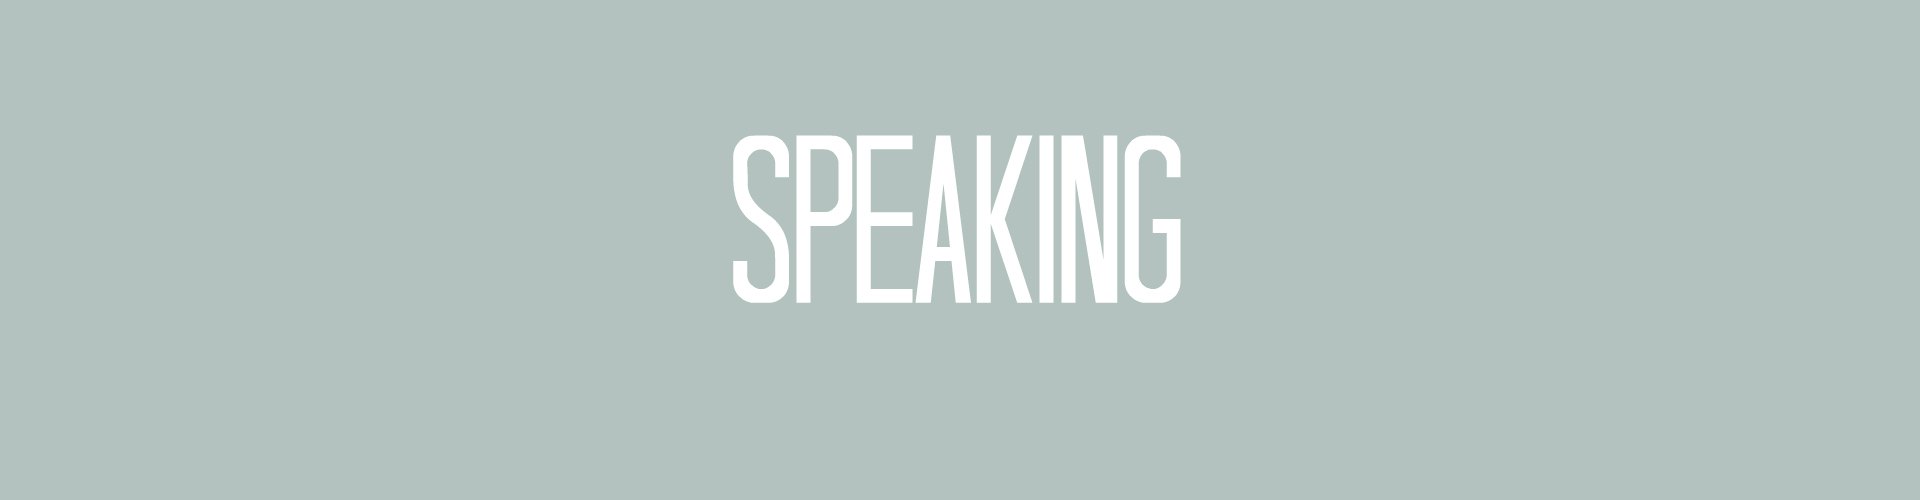 Speaking page banner